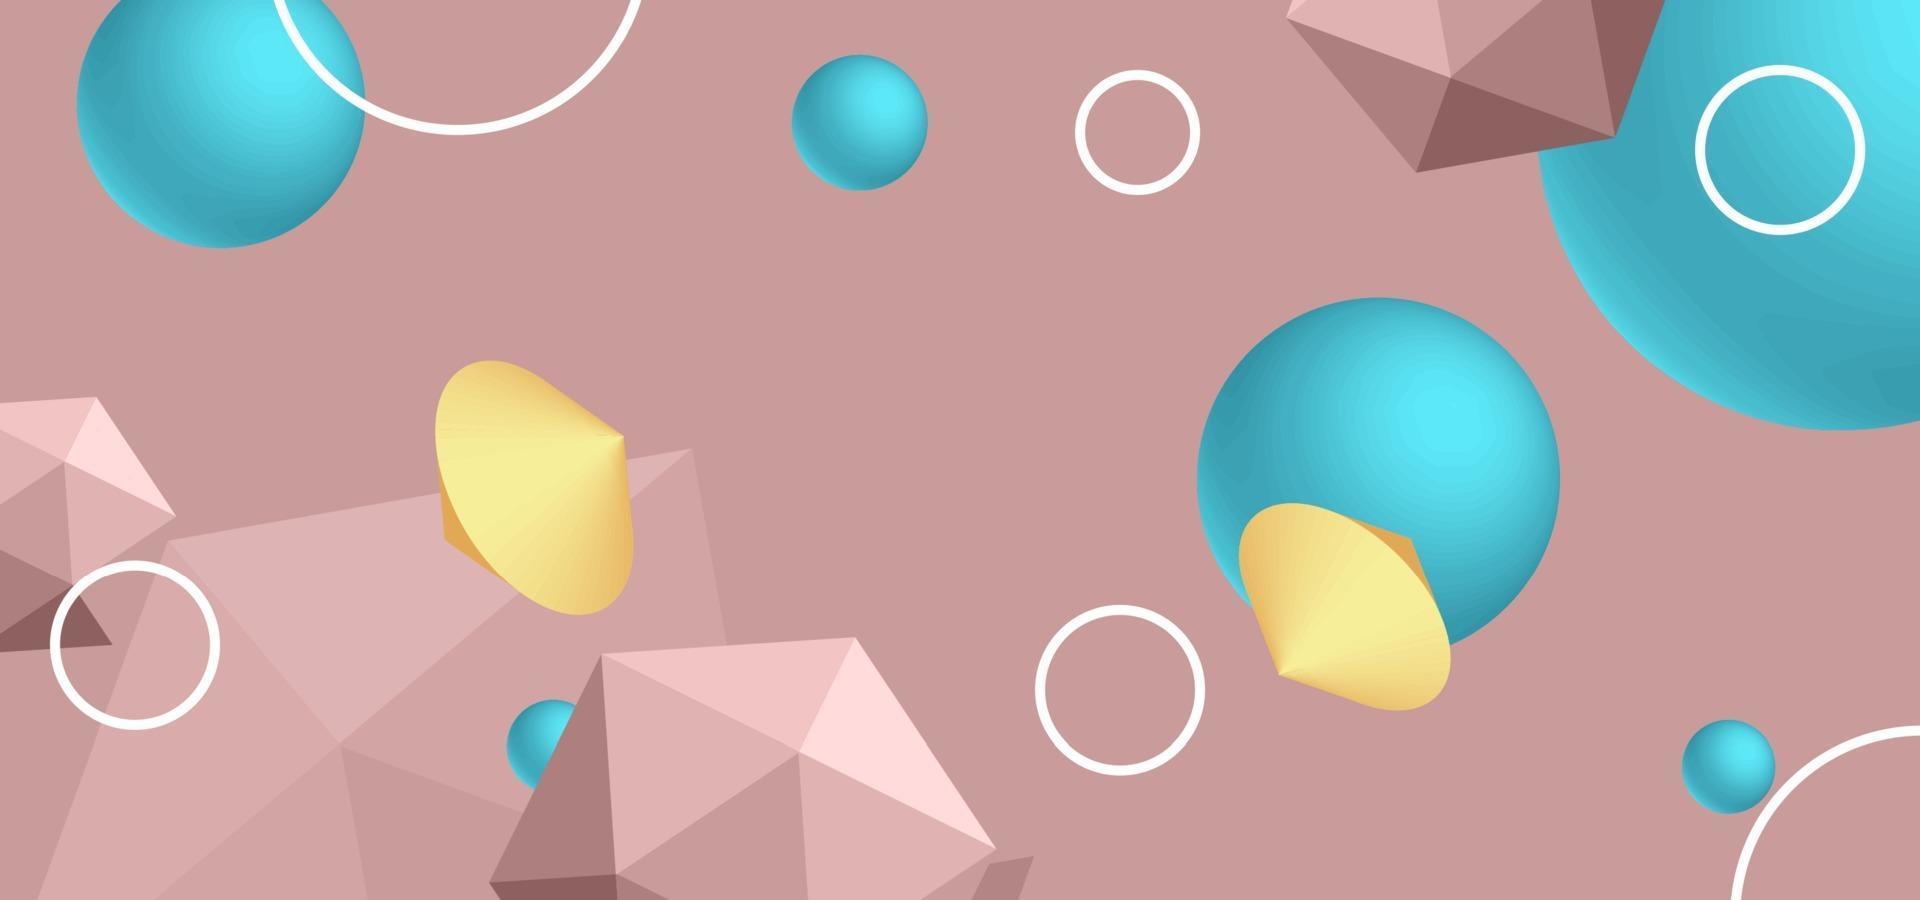 Vector abstract background with geometric shapes.